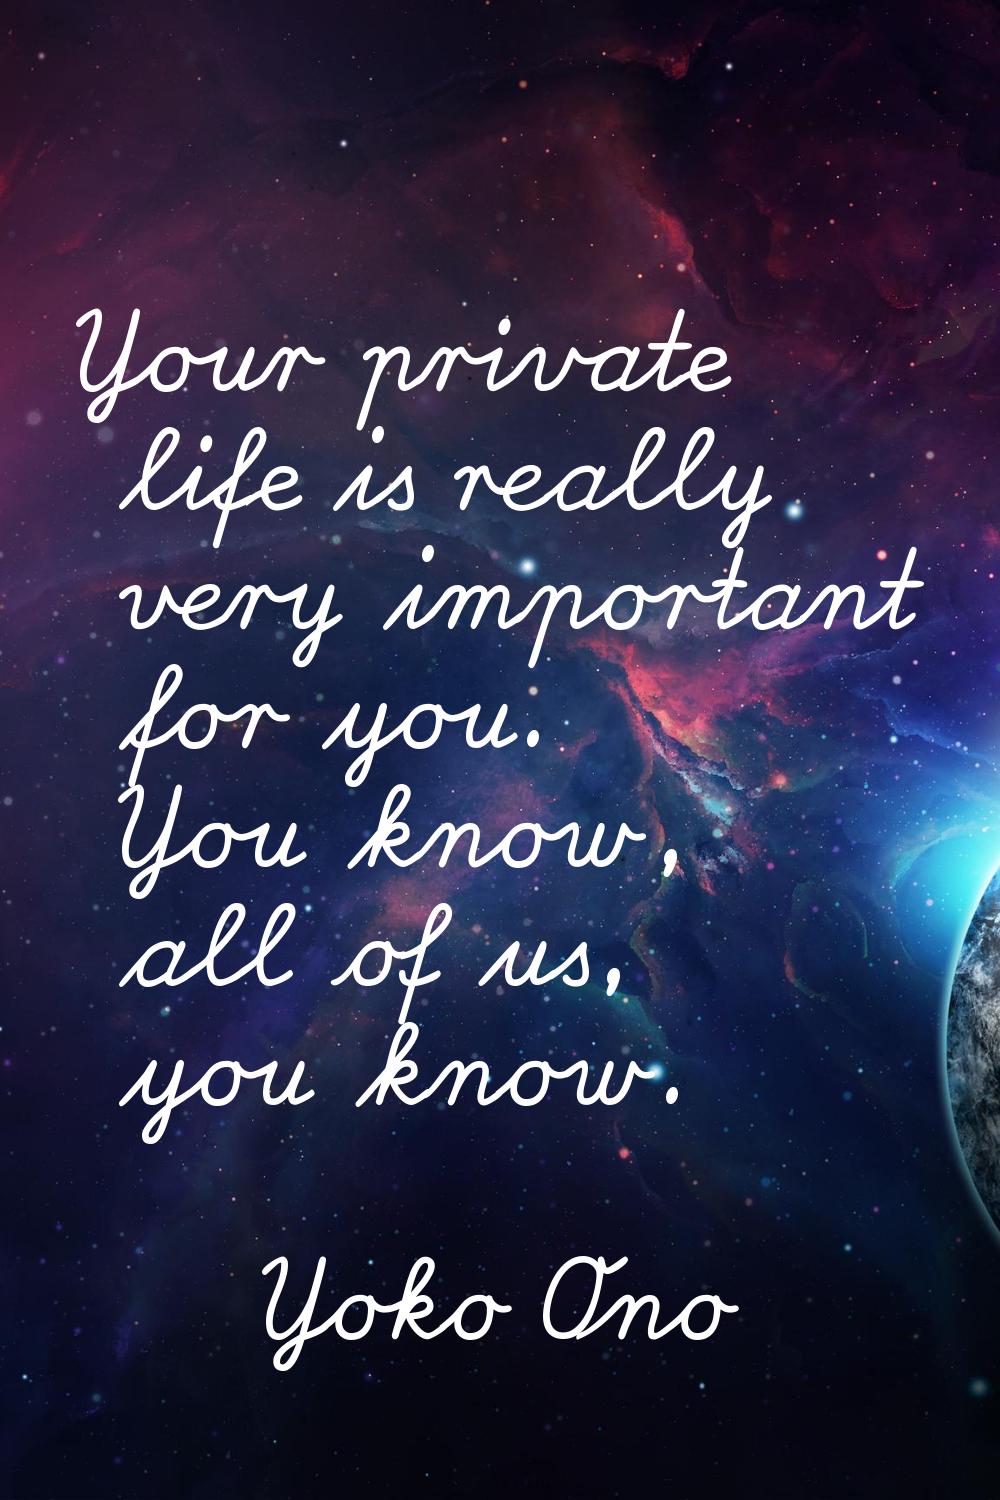 Your private life is really very important for you. You know, all of us, you know.